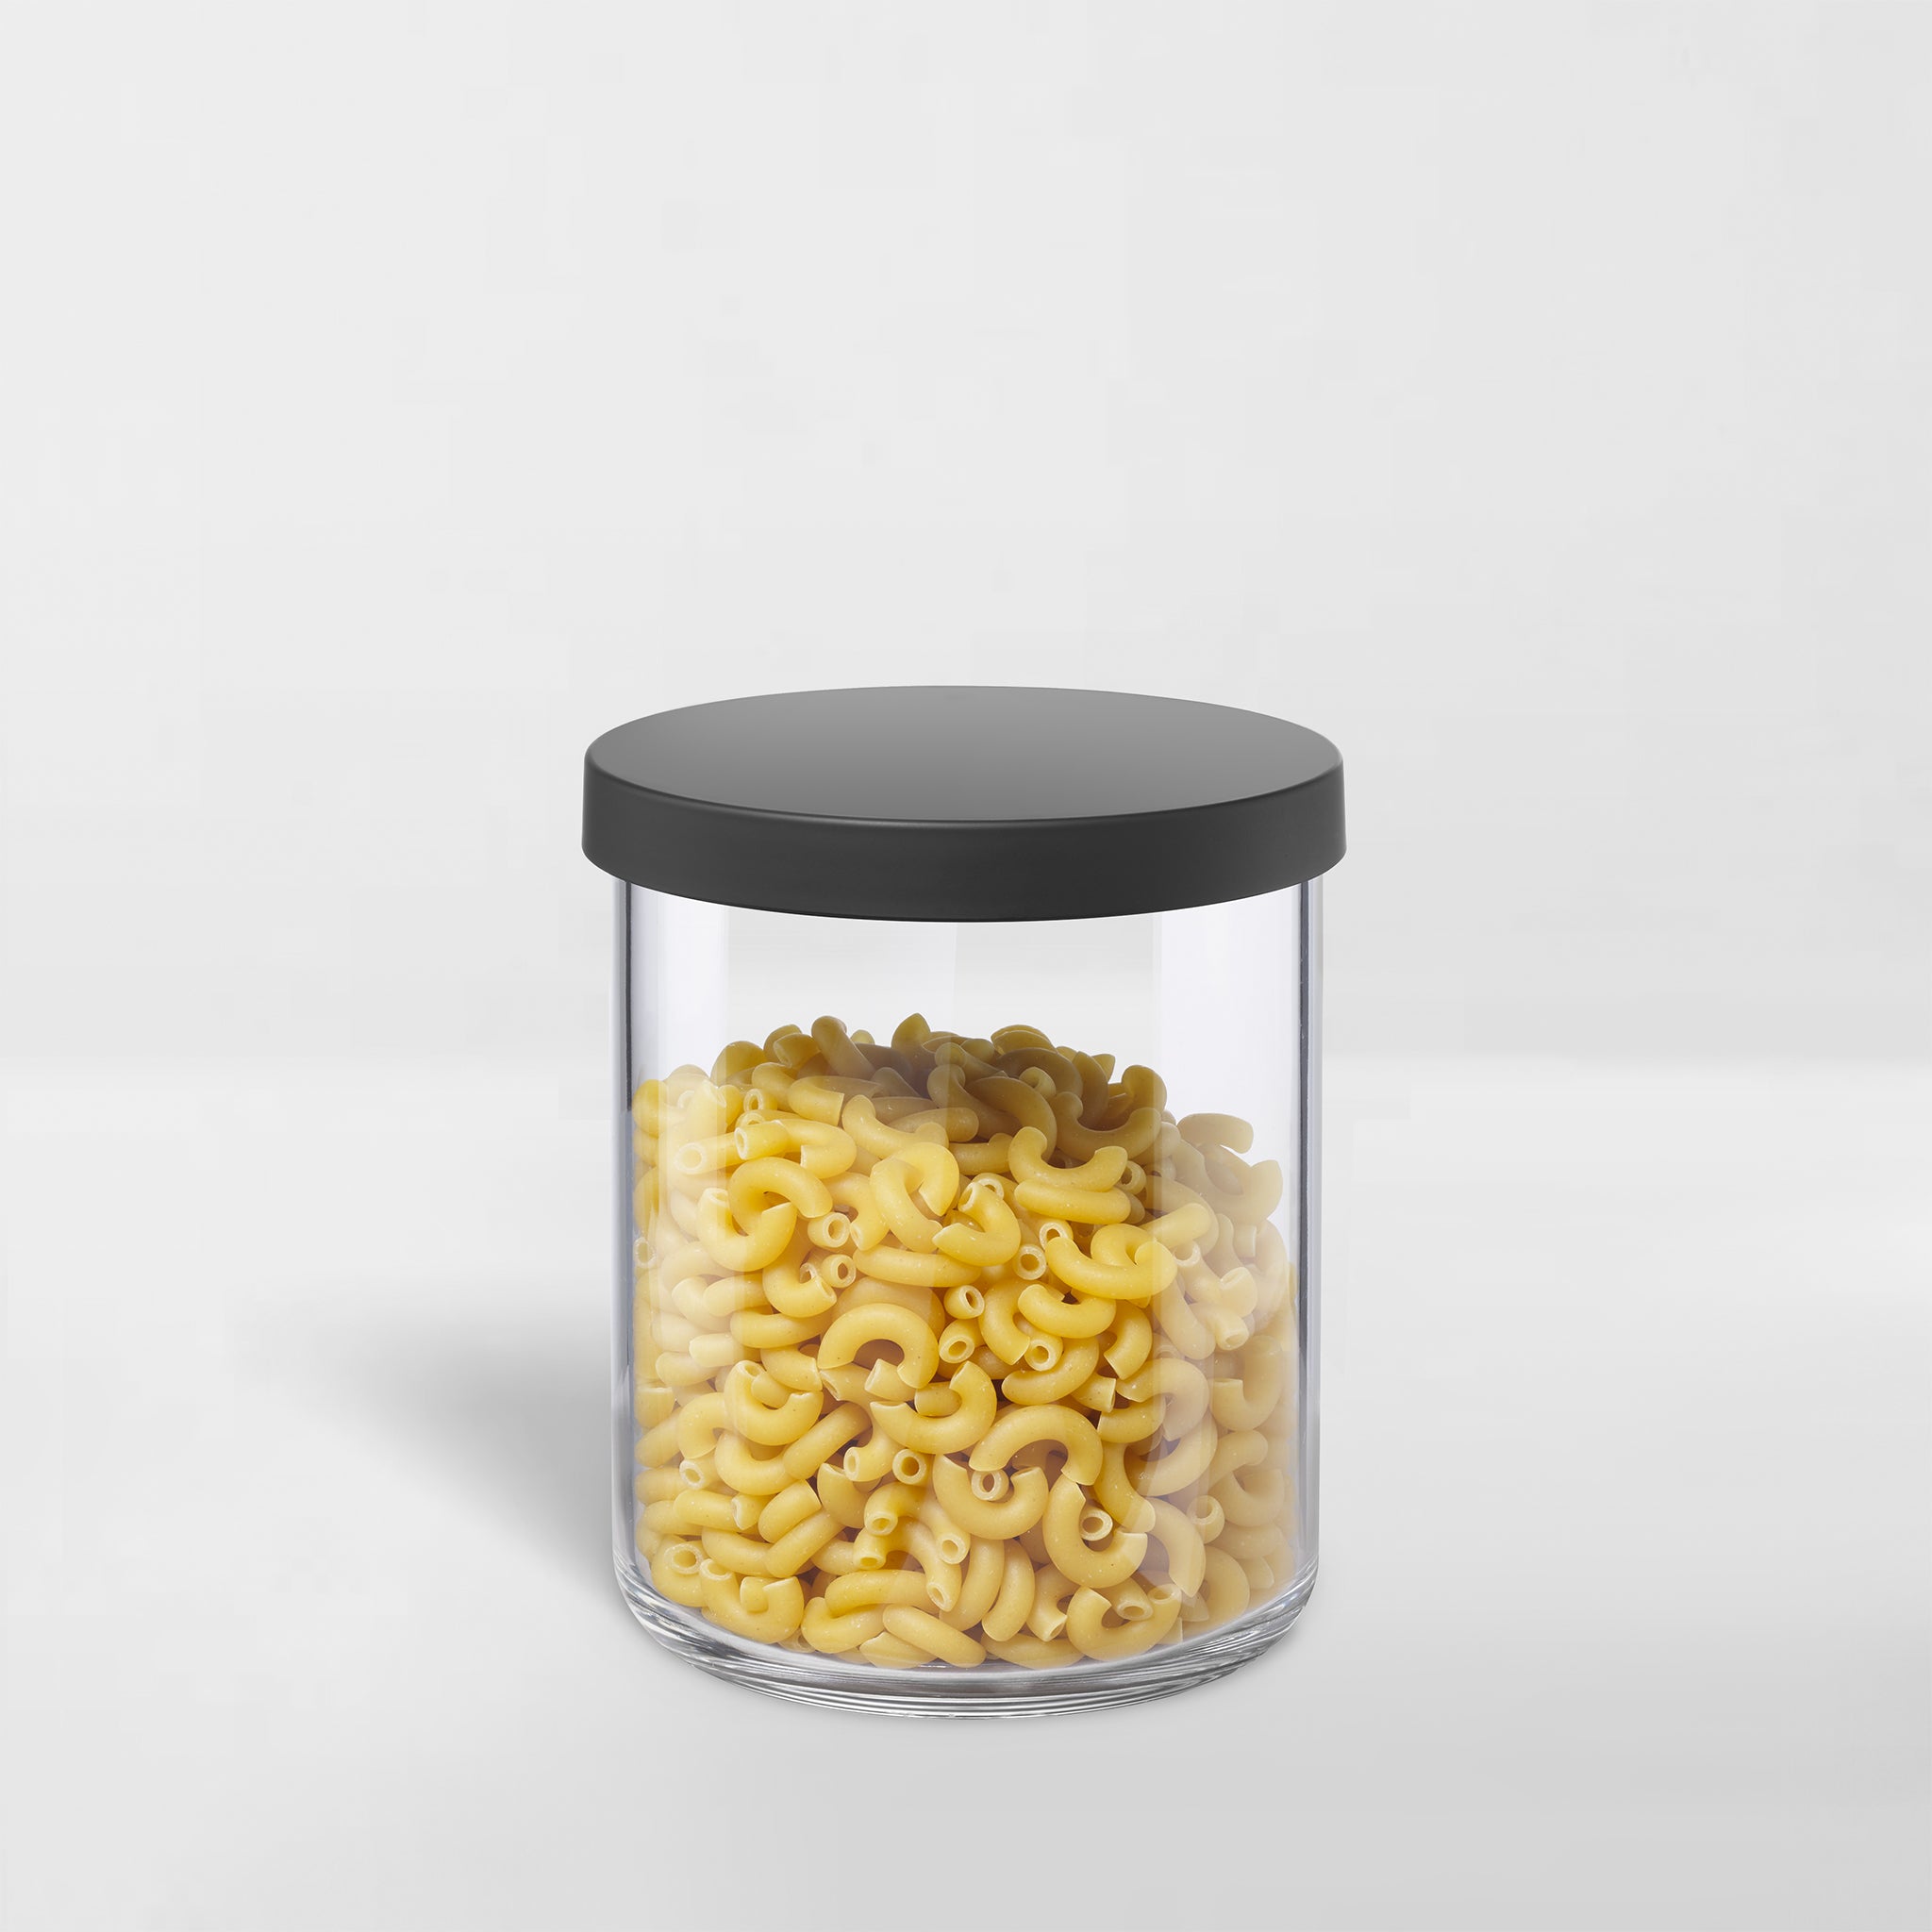 Buy Glass Storage Jars With Lid, Glass Containers From MyBorosil